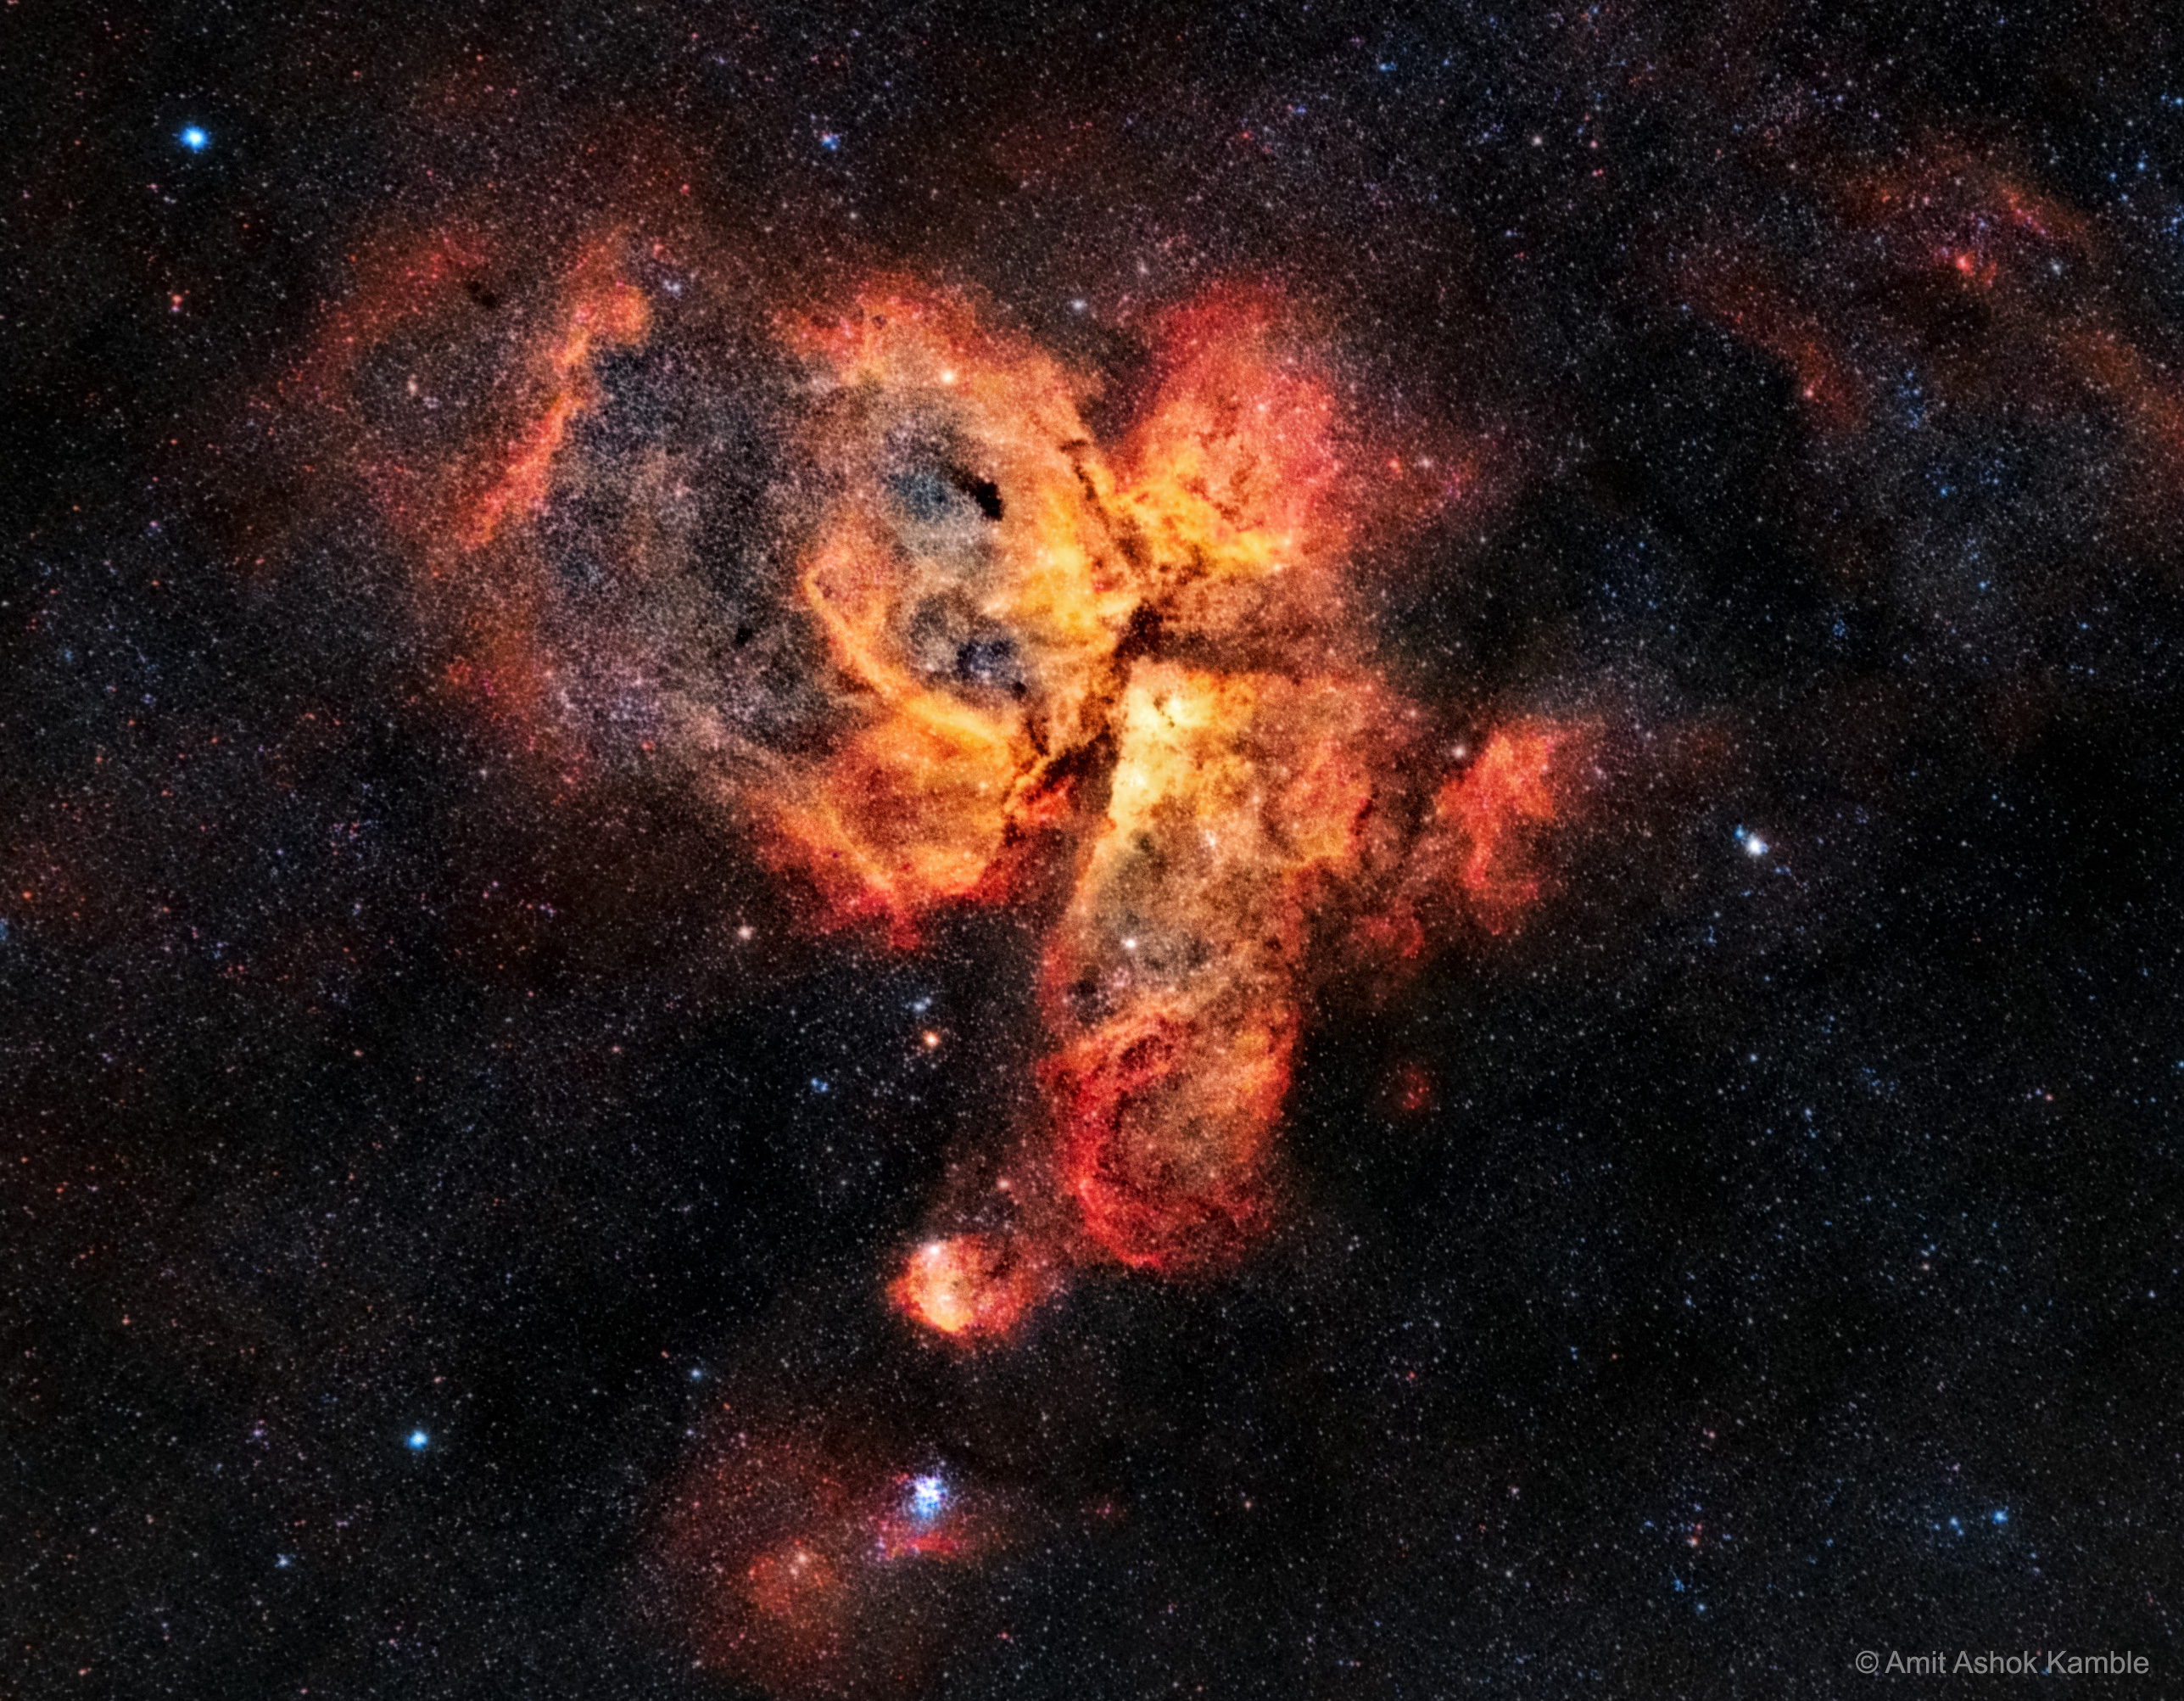 Astronomy Picture of the Day - Σελίδα 8 CarinaNebulaWide_Kamble_2575